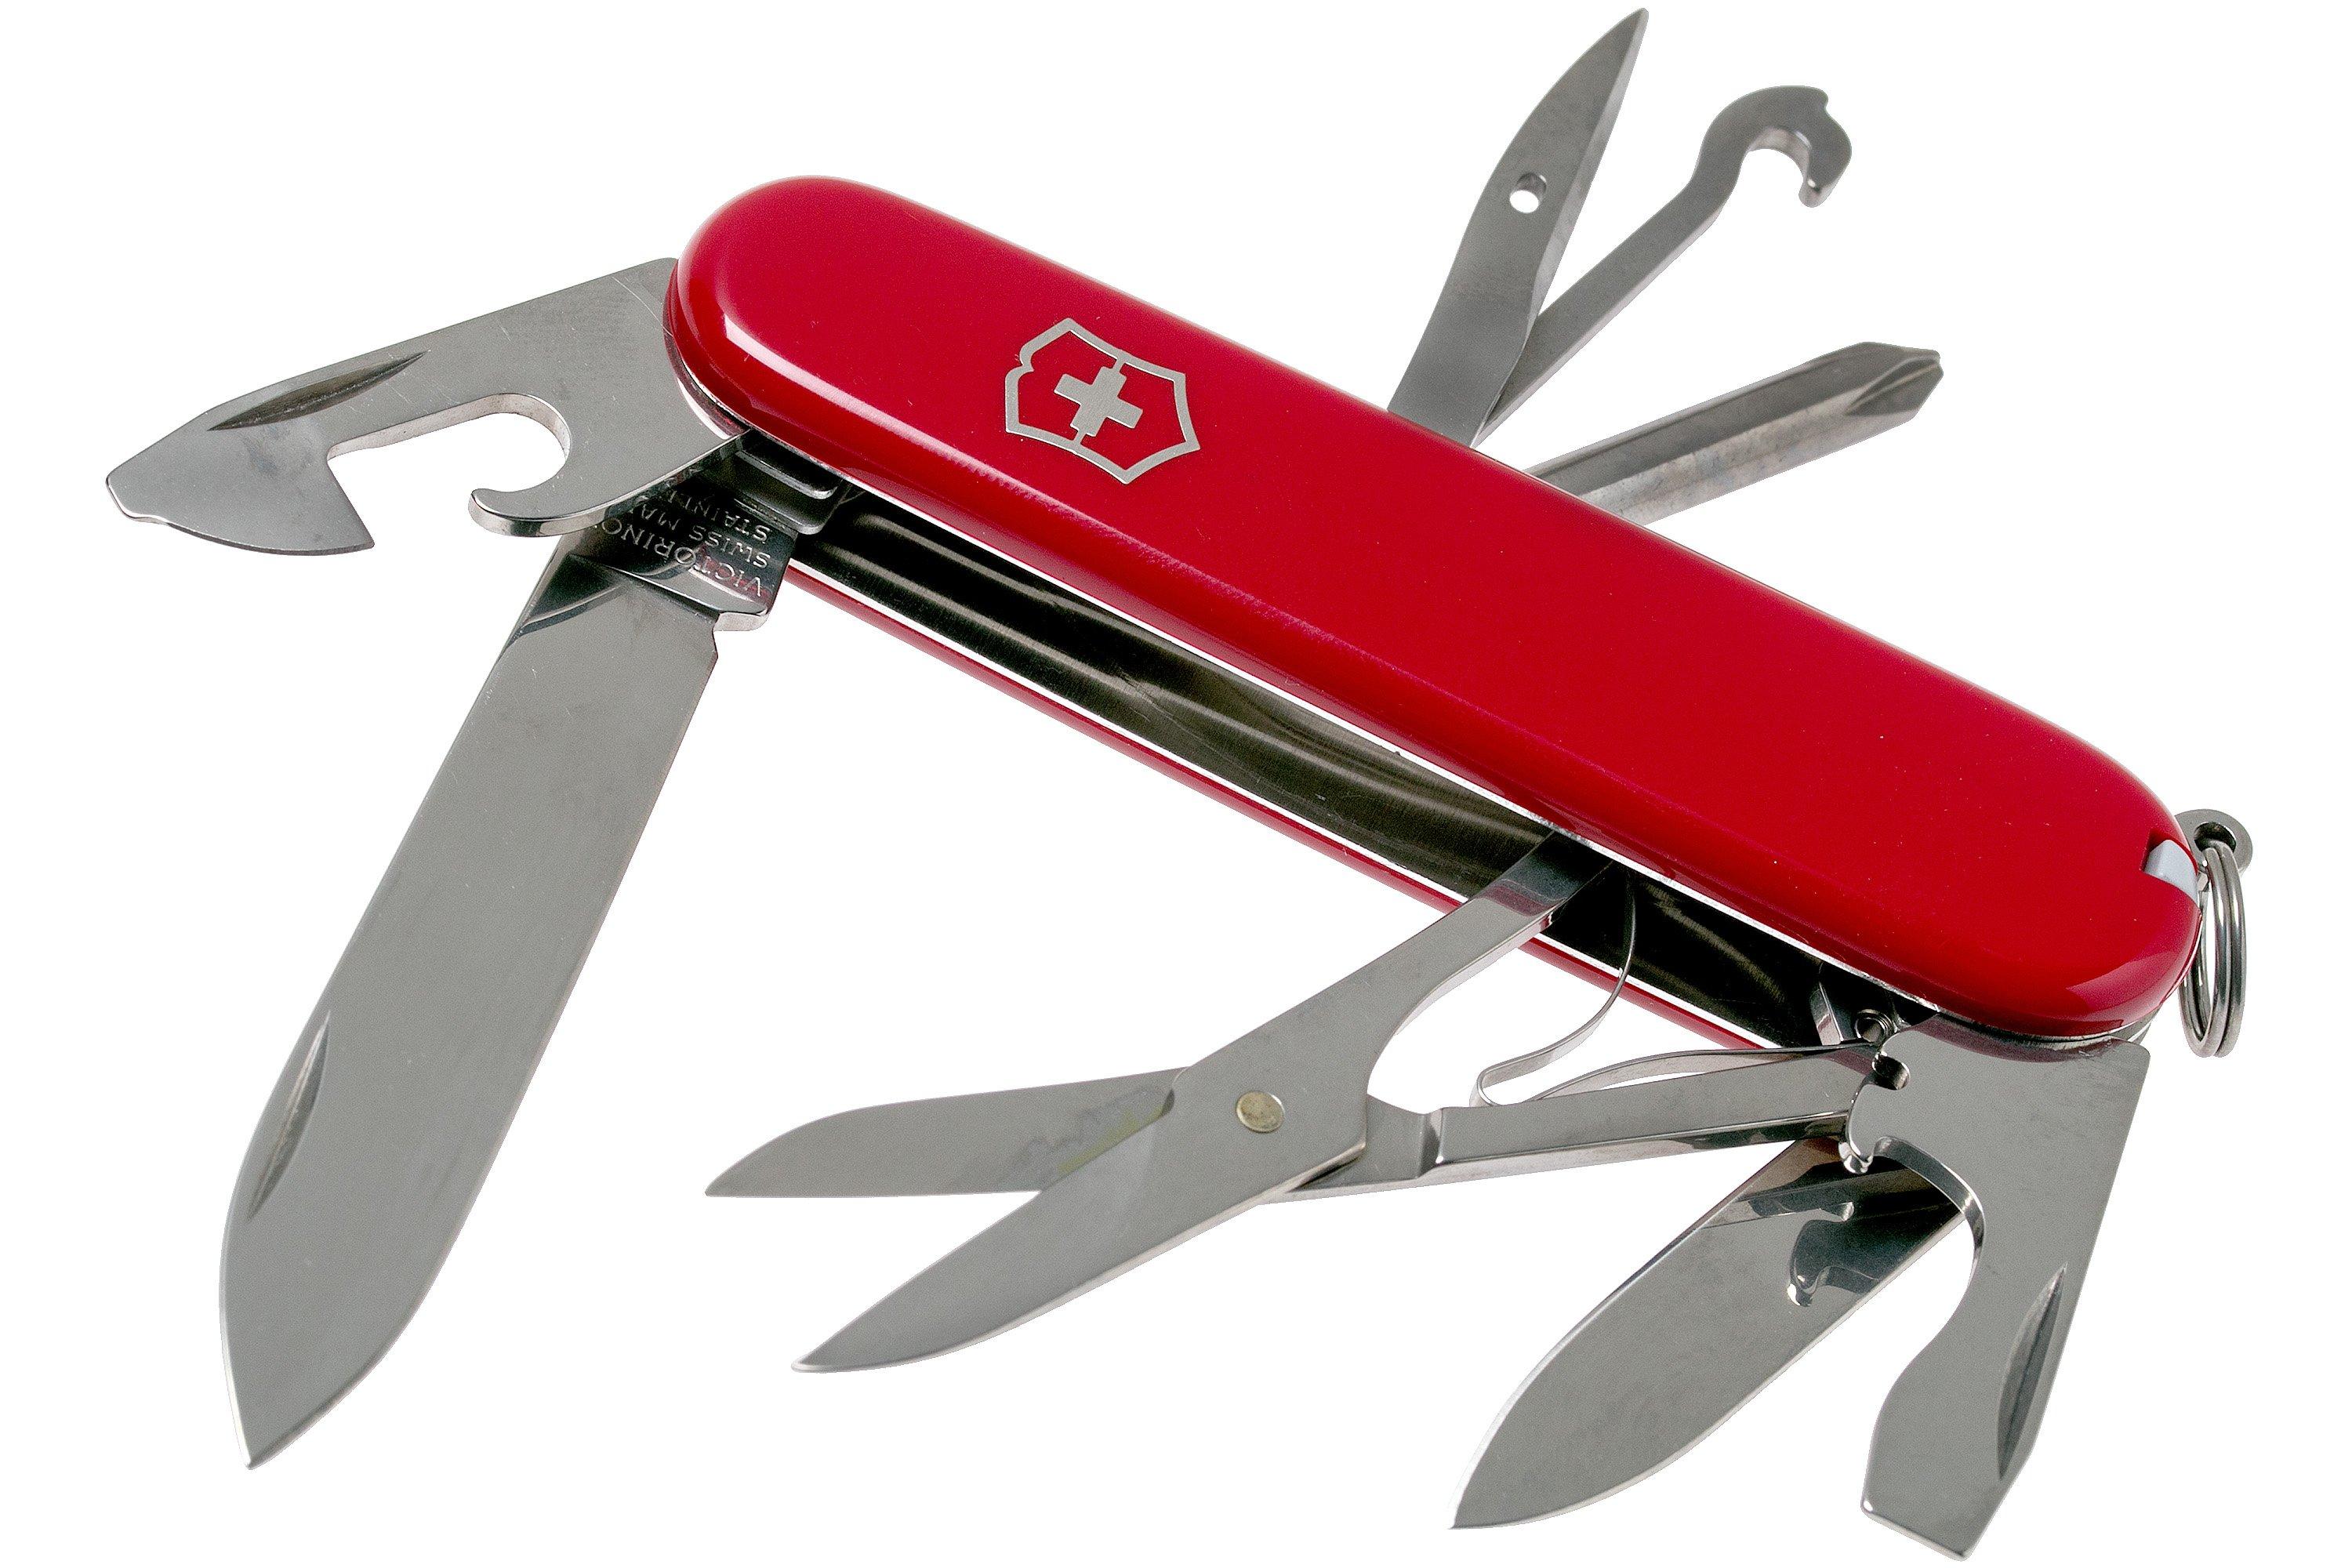 Tinker　shopping　Advantageously　Victorinox　knife　pocket　Swiss　Super　1.4703　red　at